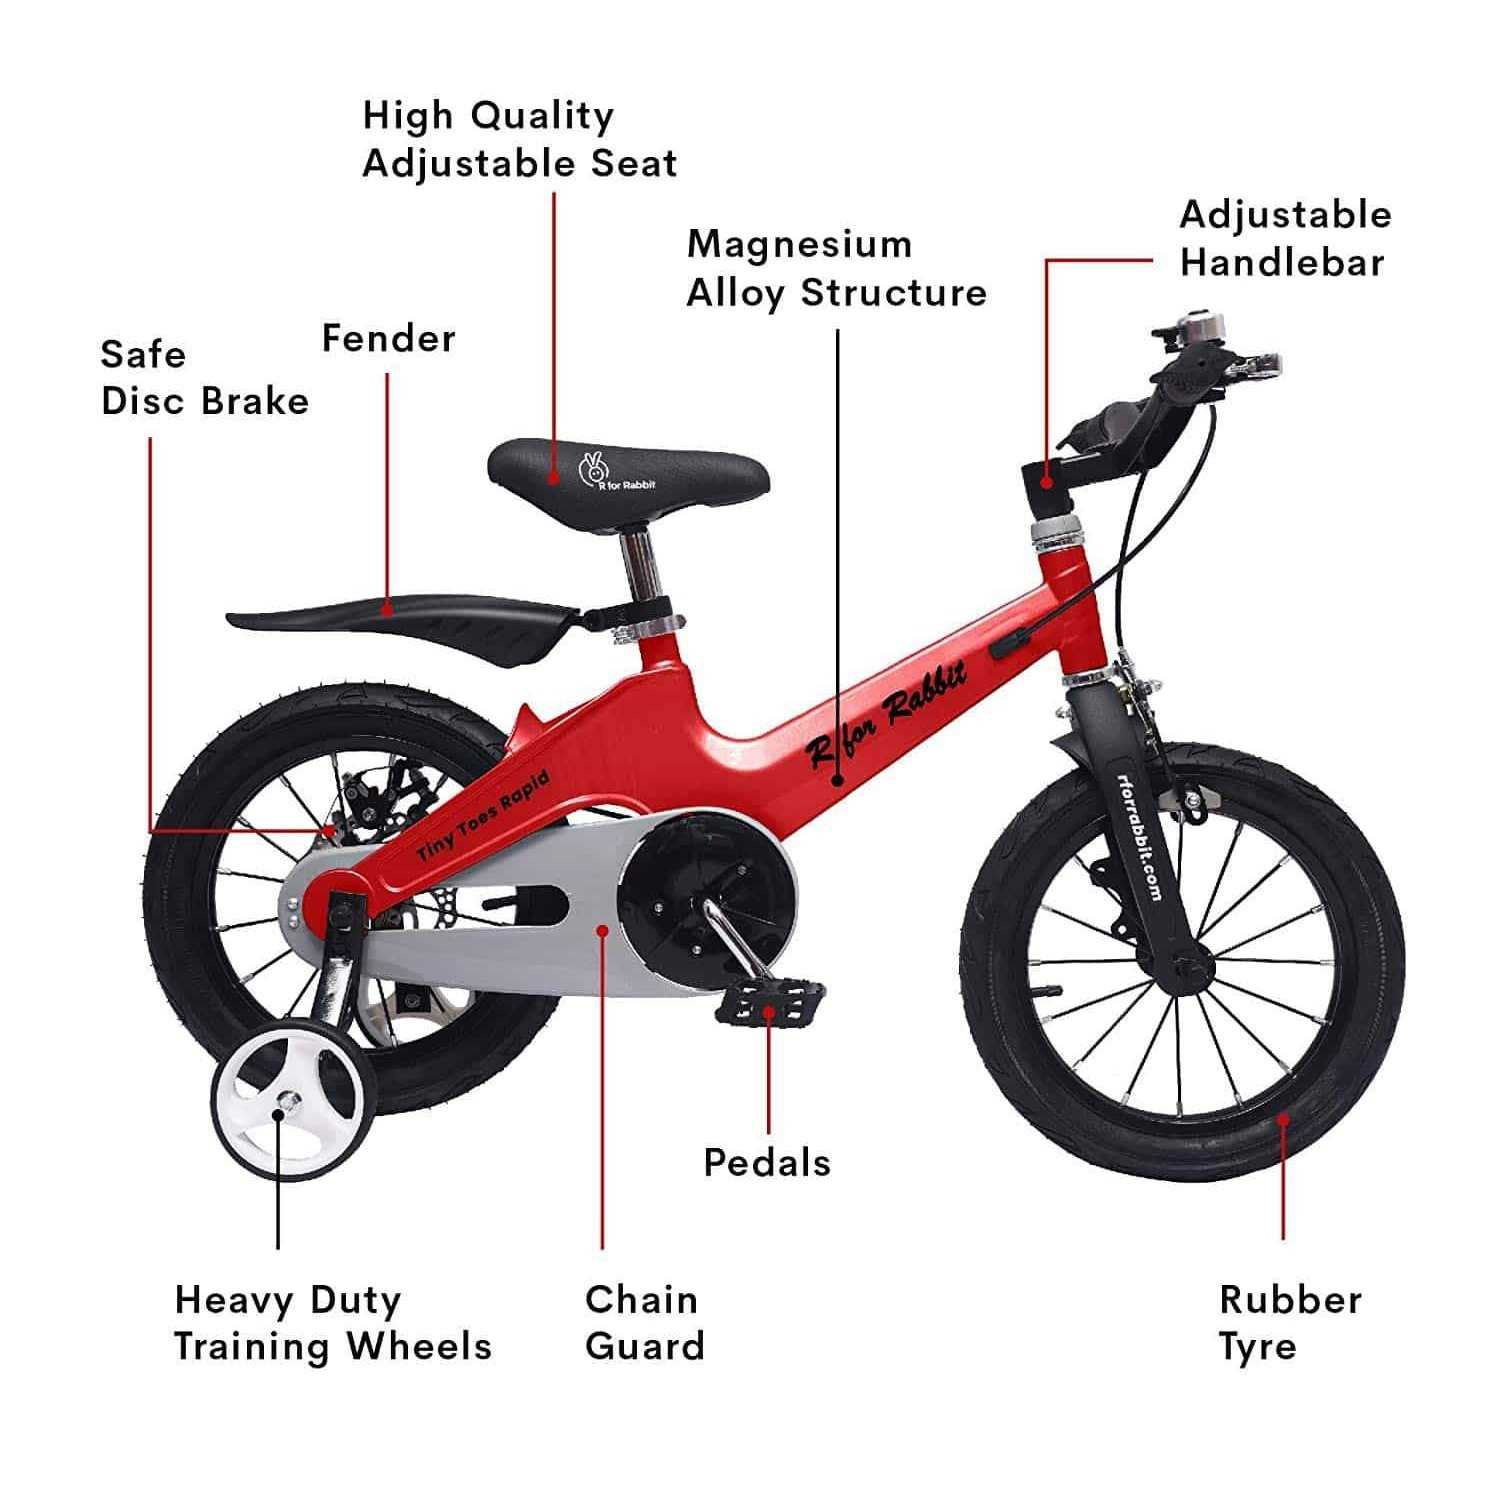 R FOR RABBIT Tiny Toes Rapid Plug and Play Kids Bicycle 14 inch T for 3 to 5 years